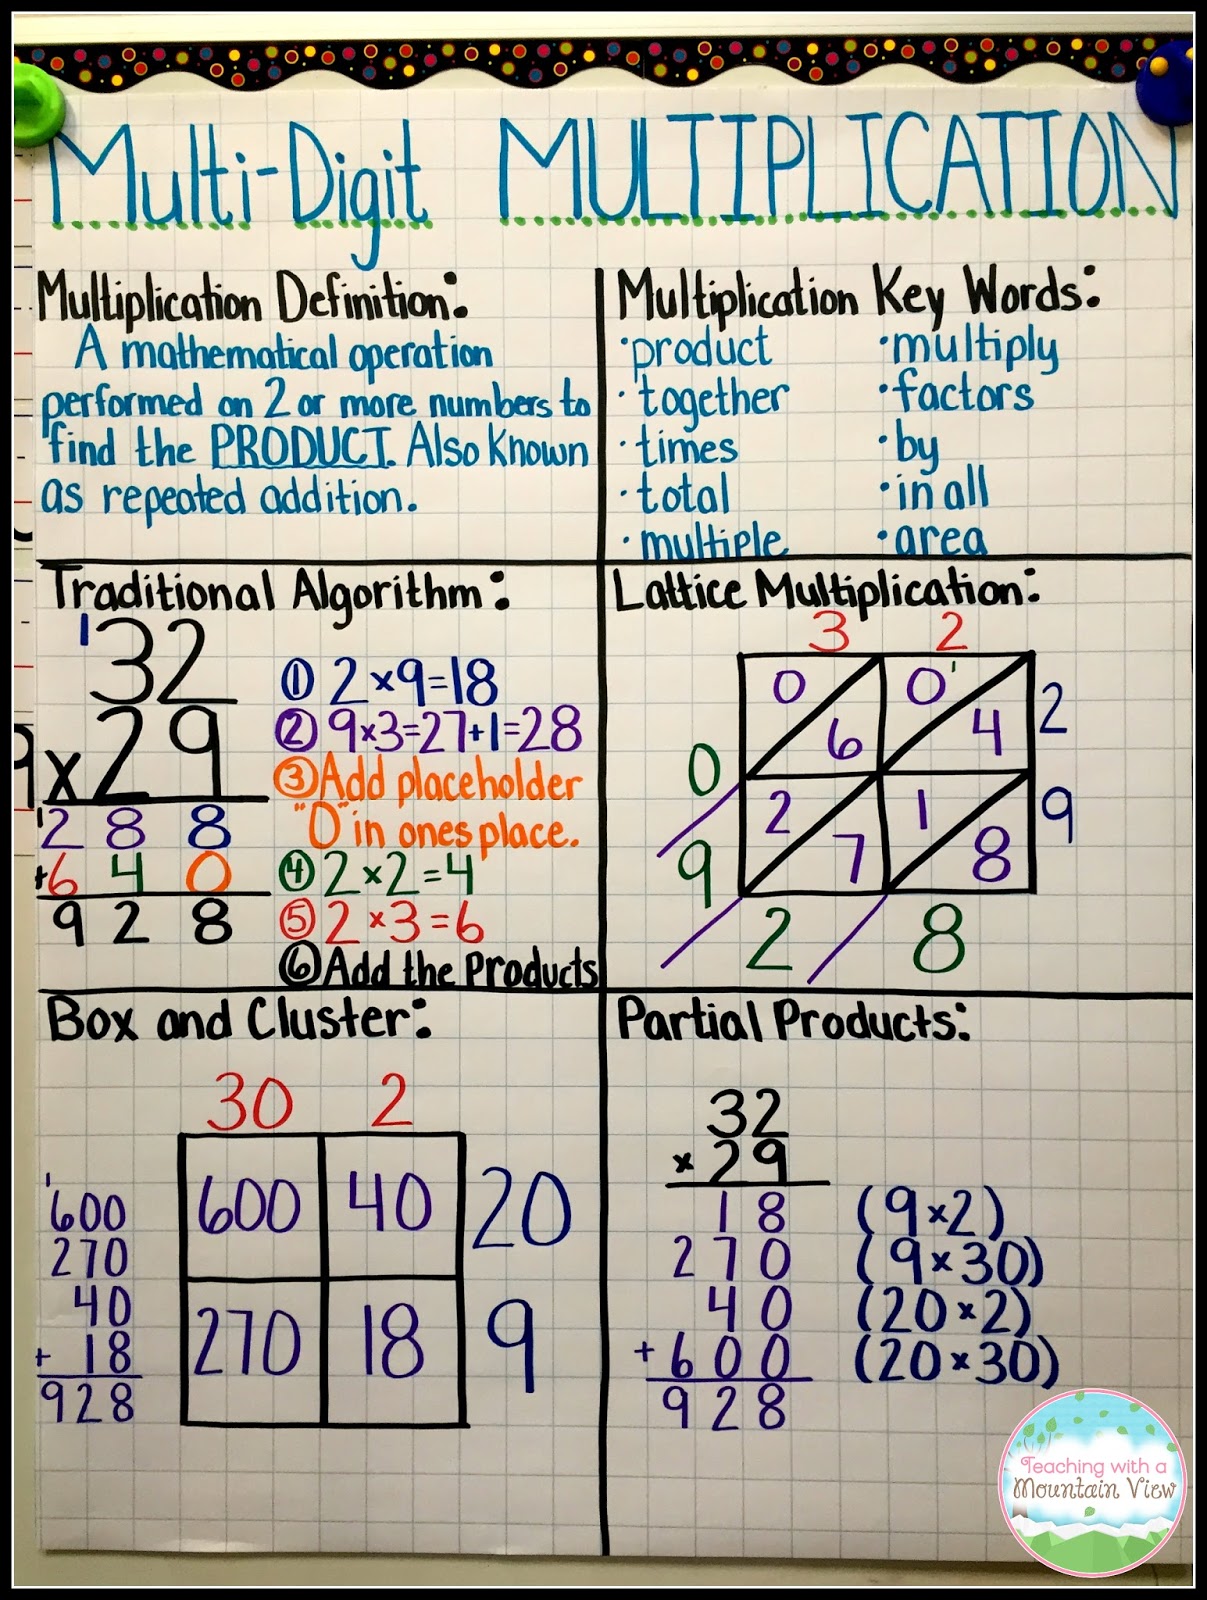 Properties Of Multiplication Anchor Chart